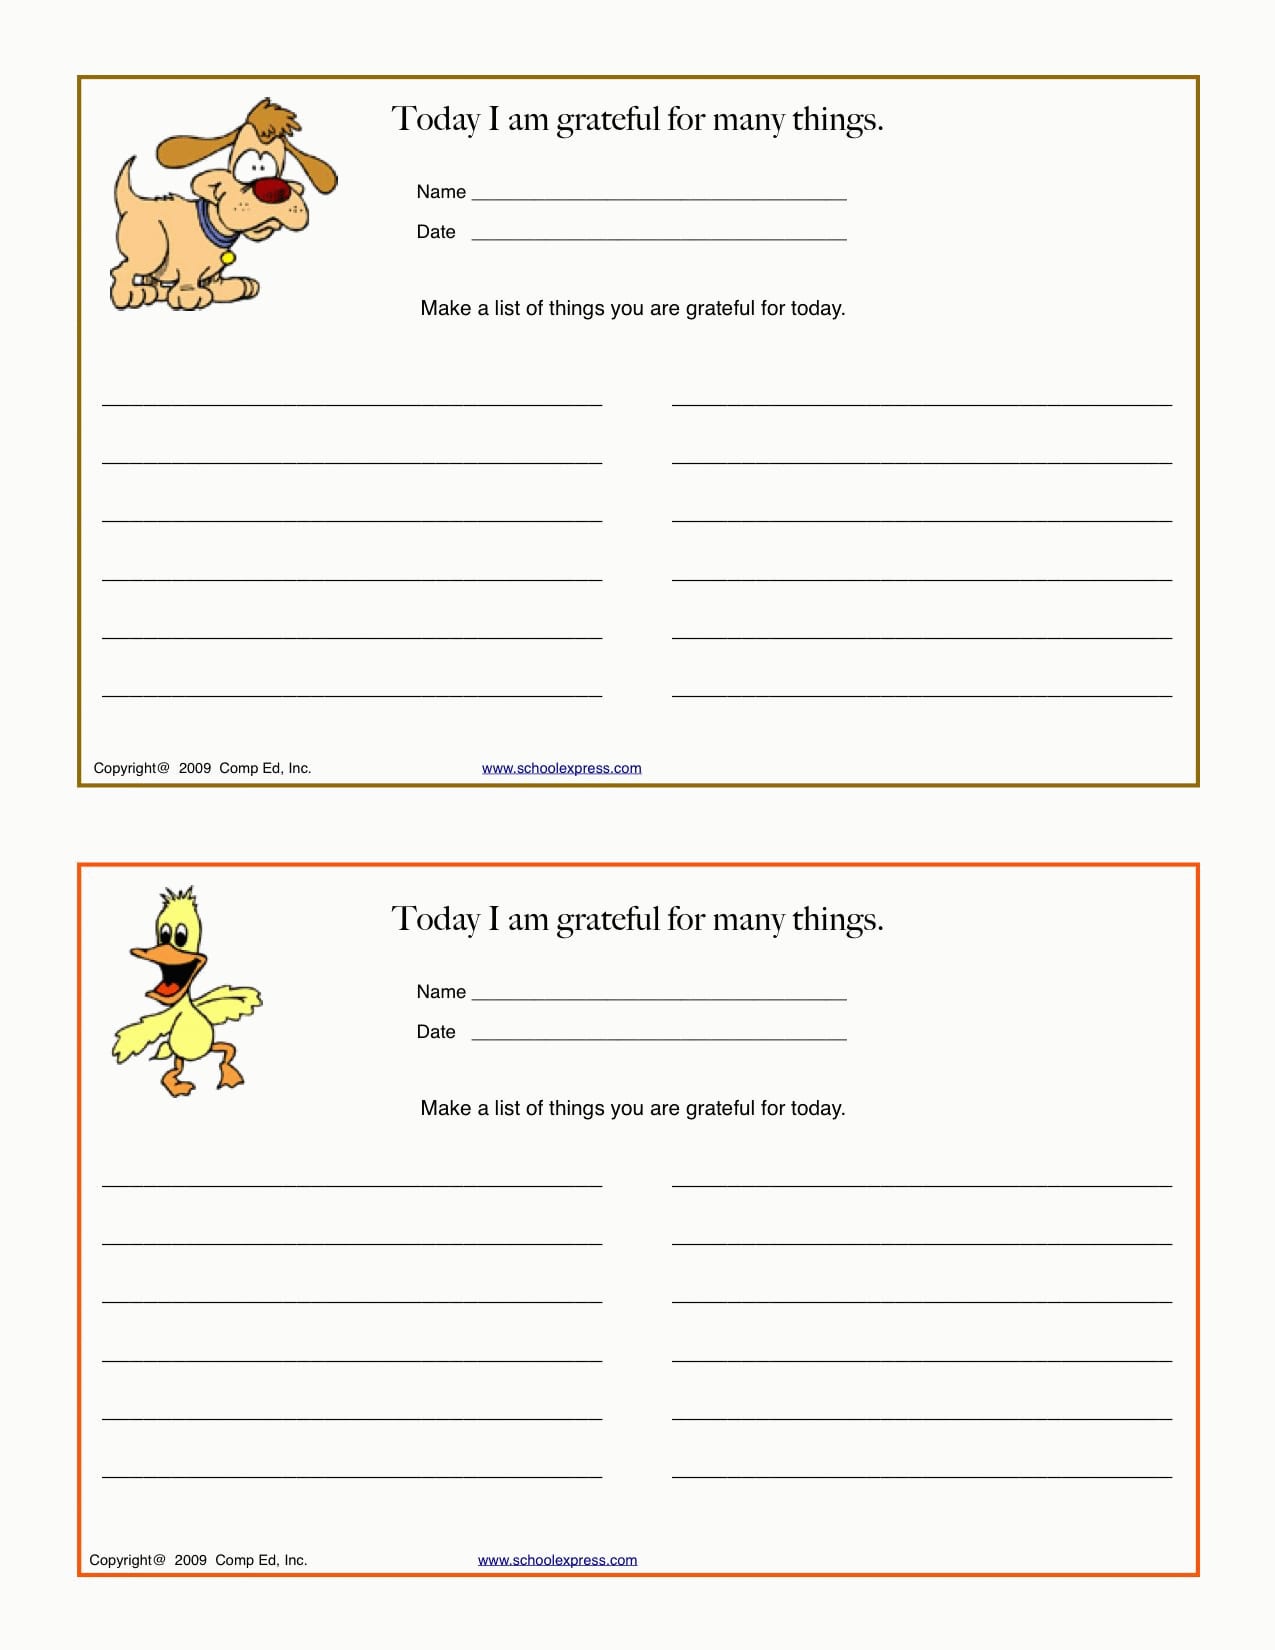 Coping Skills Worksheets For Youth  Briefencounters Throughout Coping Skills Worksheets For Youth